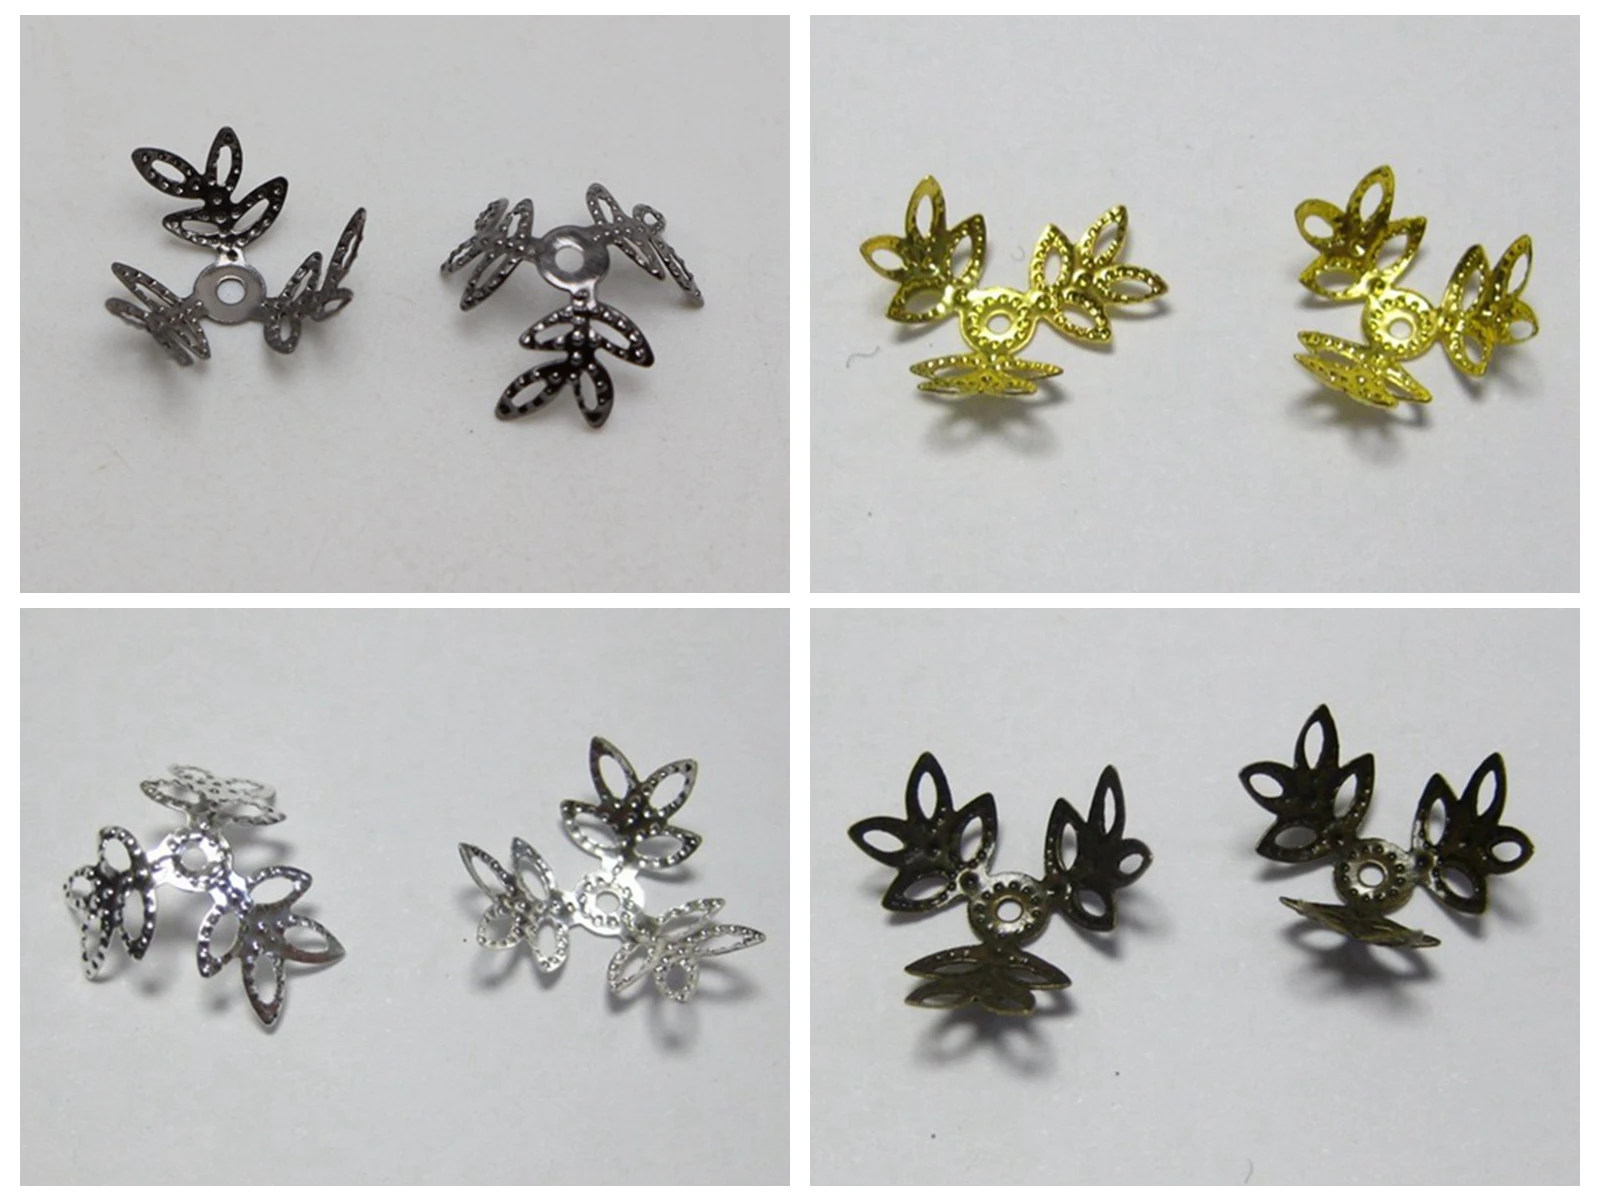 200pcs Silver-Gold-Gunblack 3-Petals Flower Jewelry Beads Caps 14mm Fit 12mm-18mm Beads